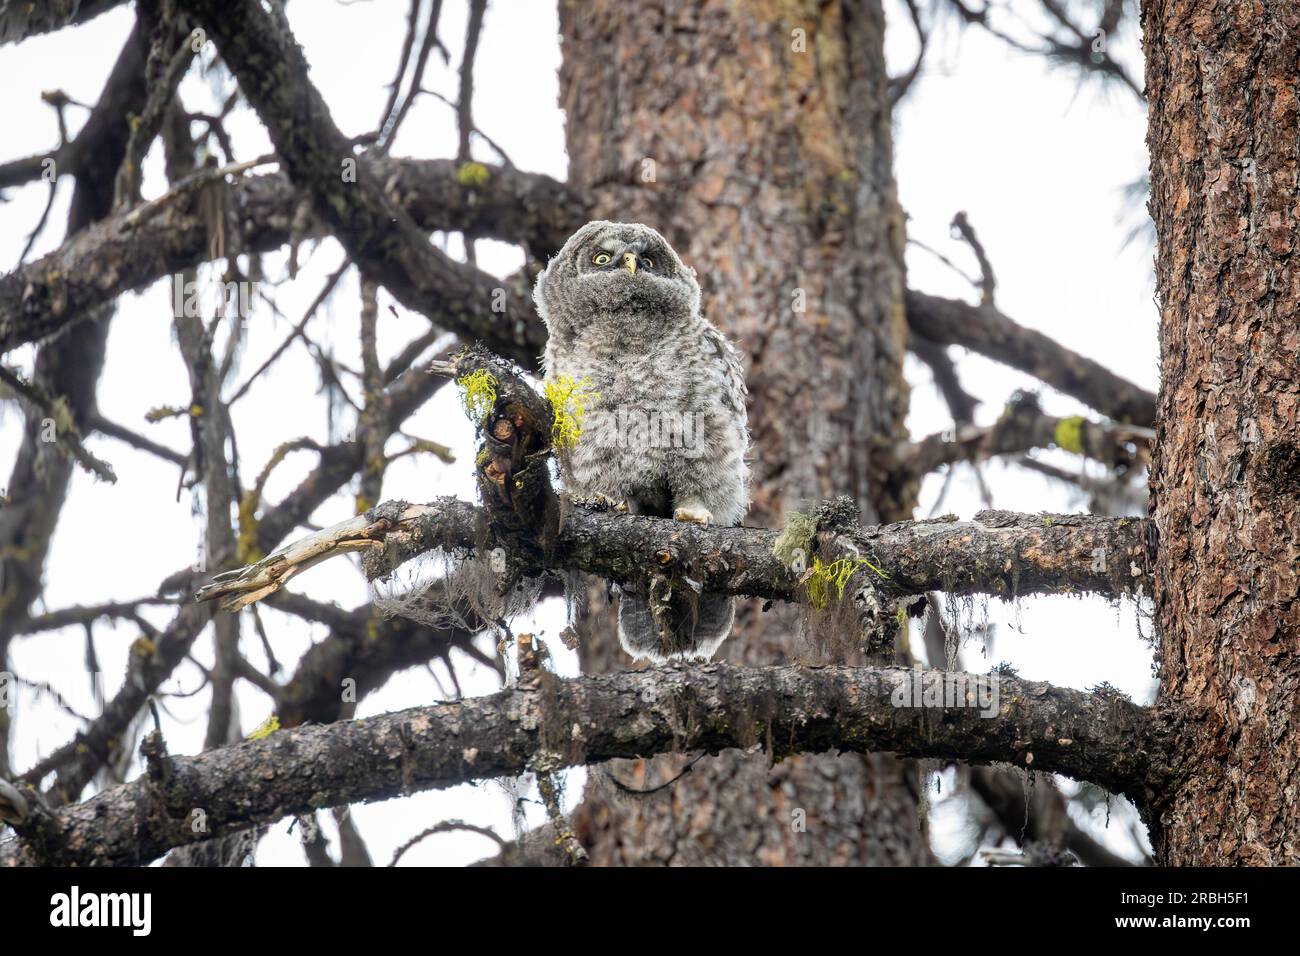 A young Great gray owl (Strix nebulosa), just fledged from its nest, perches on a tree branch in the remote Cascade mountains of Southern Oregon. Stock Photo